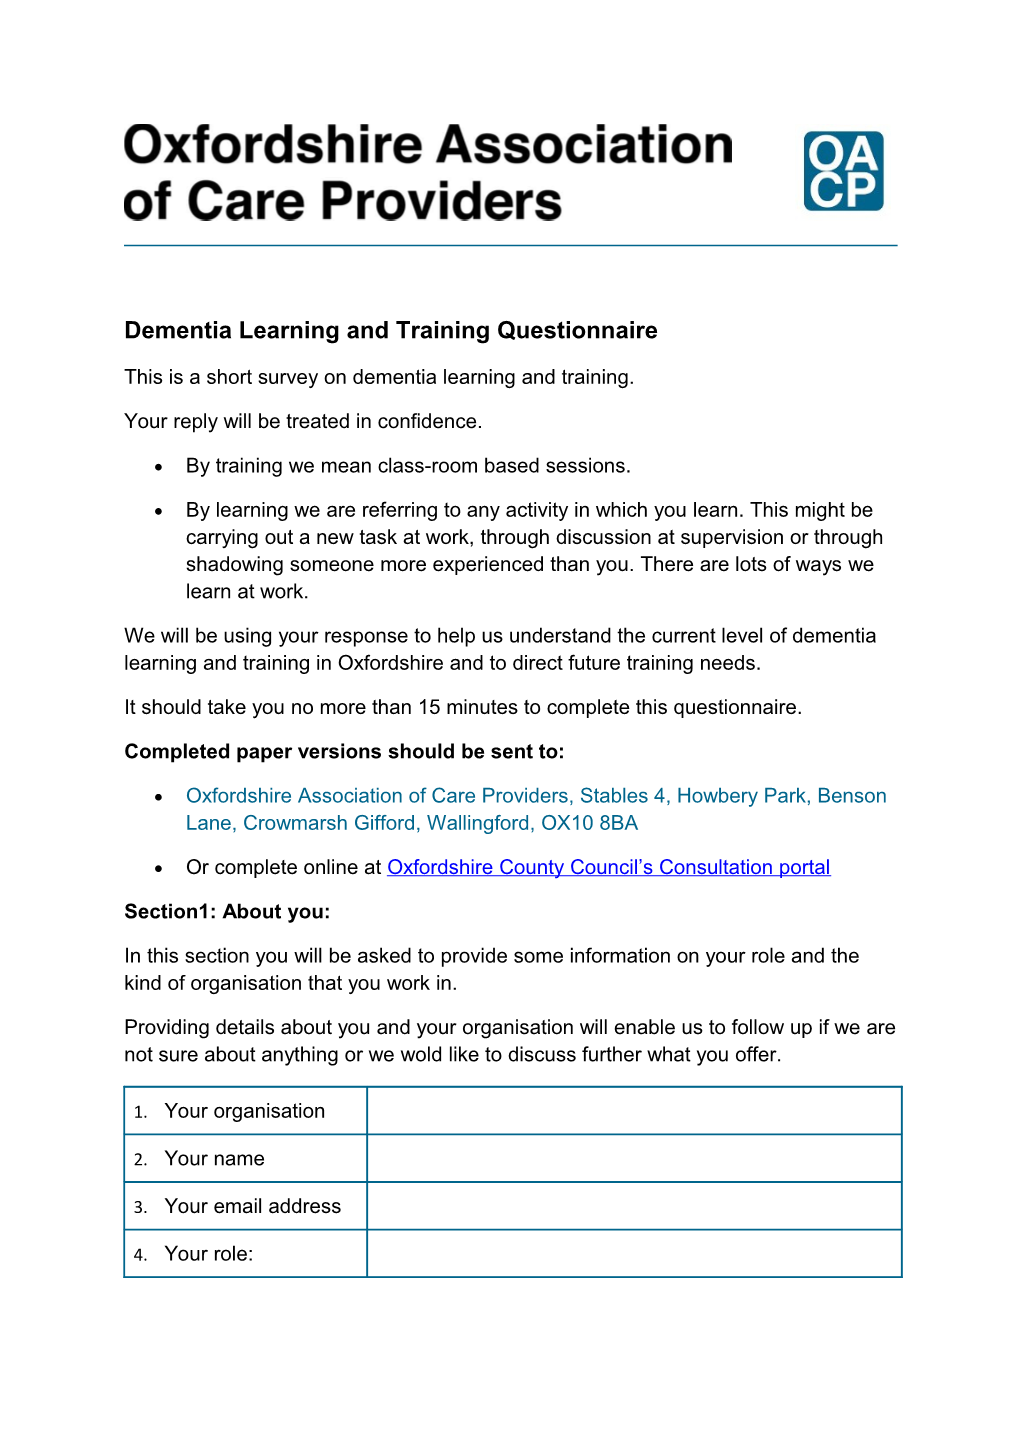 Dementia Learning and Training Questionnaire